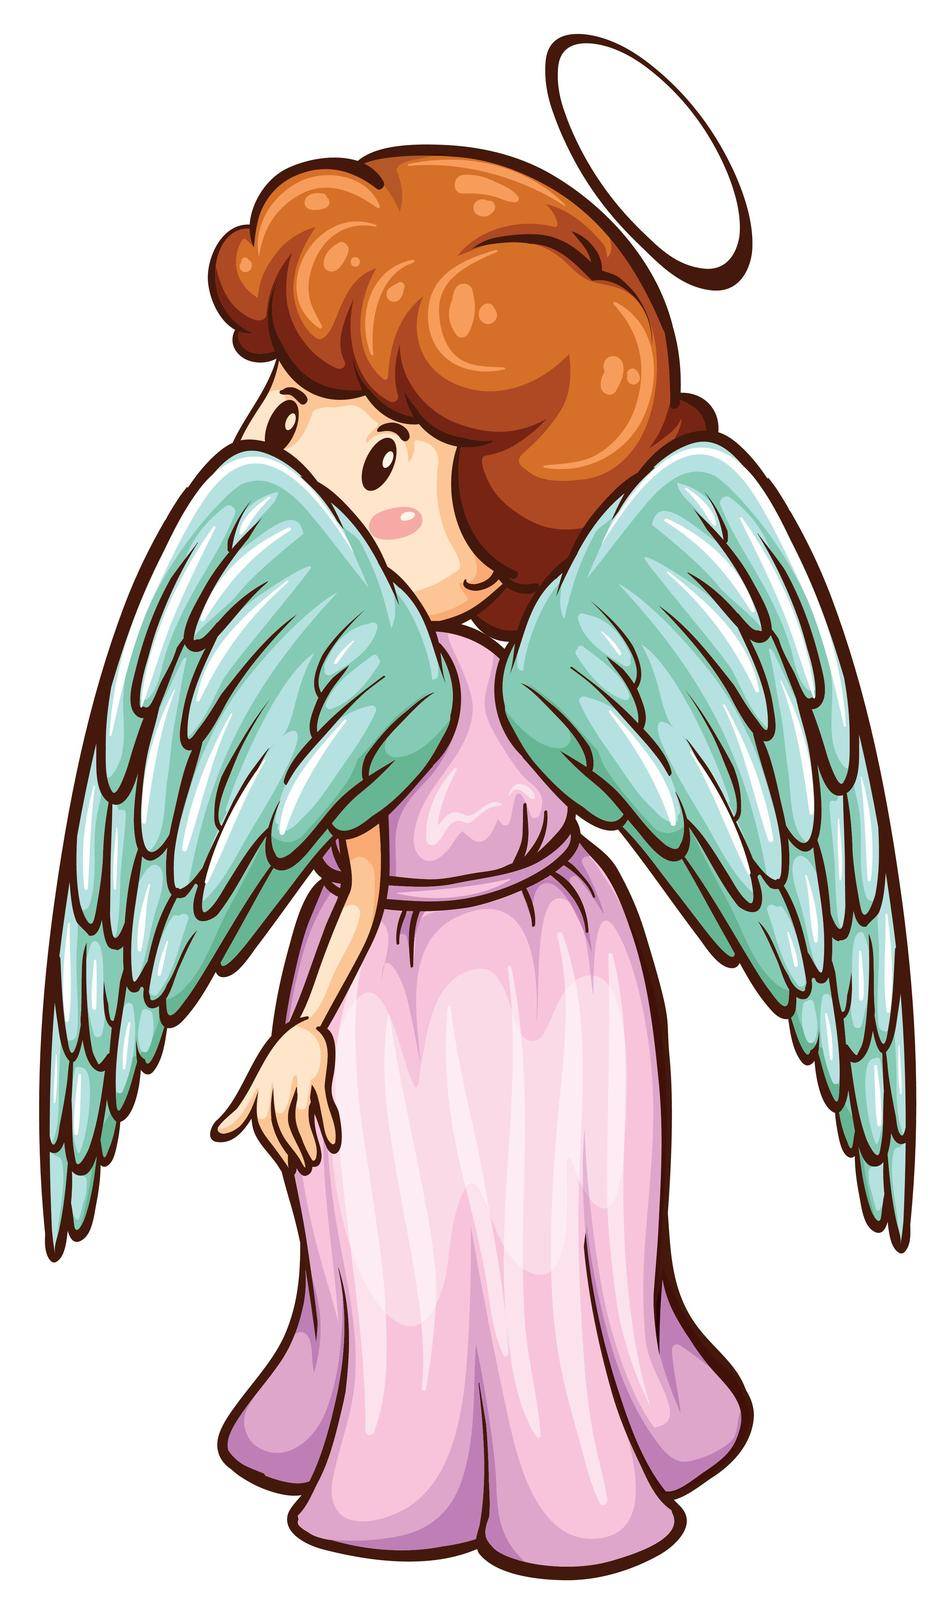 Illustration of a simple sketch of an angel on a white background